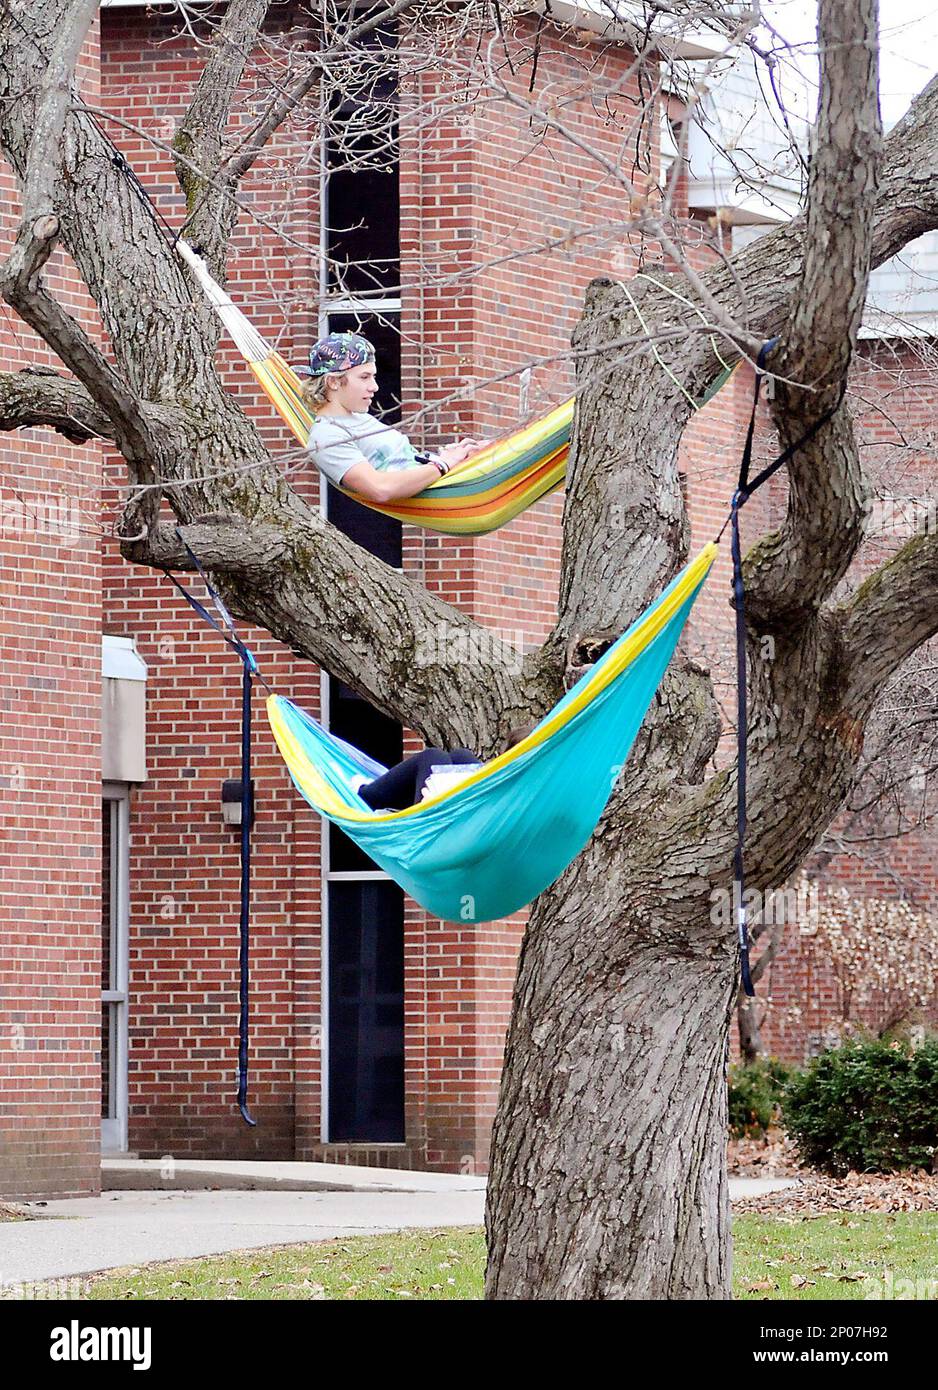 Anderson University freshmen Levi Vick and Vanessa Schuldt relax in their hammocks high in this tree Tuesday afternoon February 21, 2017 in front of Rice Hall on the Anderson, Indiana campus taking advantage of the mild winter weather. (John P. Cleary/The Herald-Bulletin via AP) Stock Photo